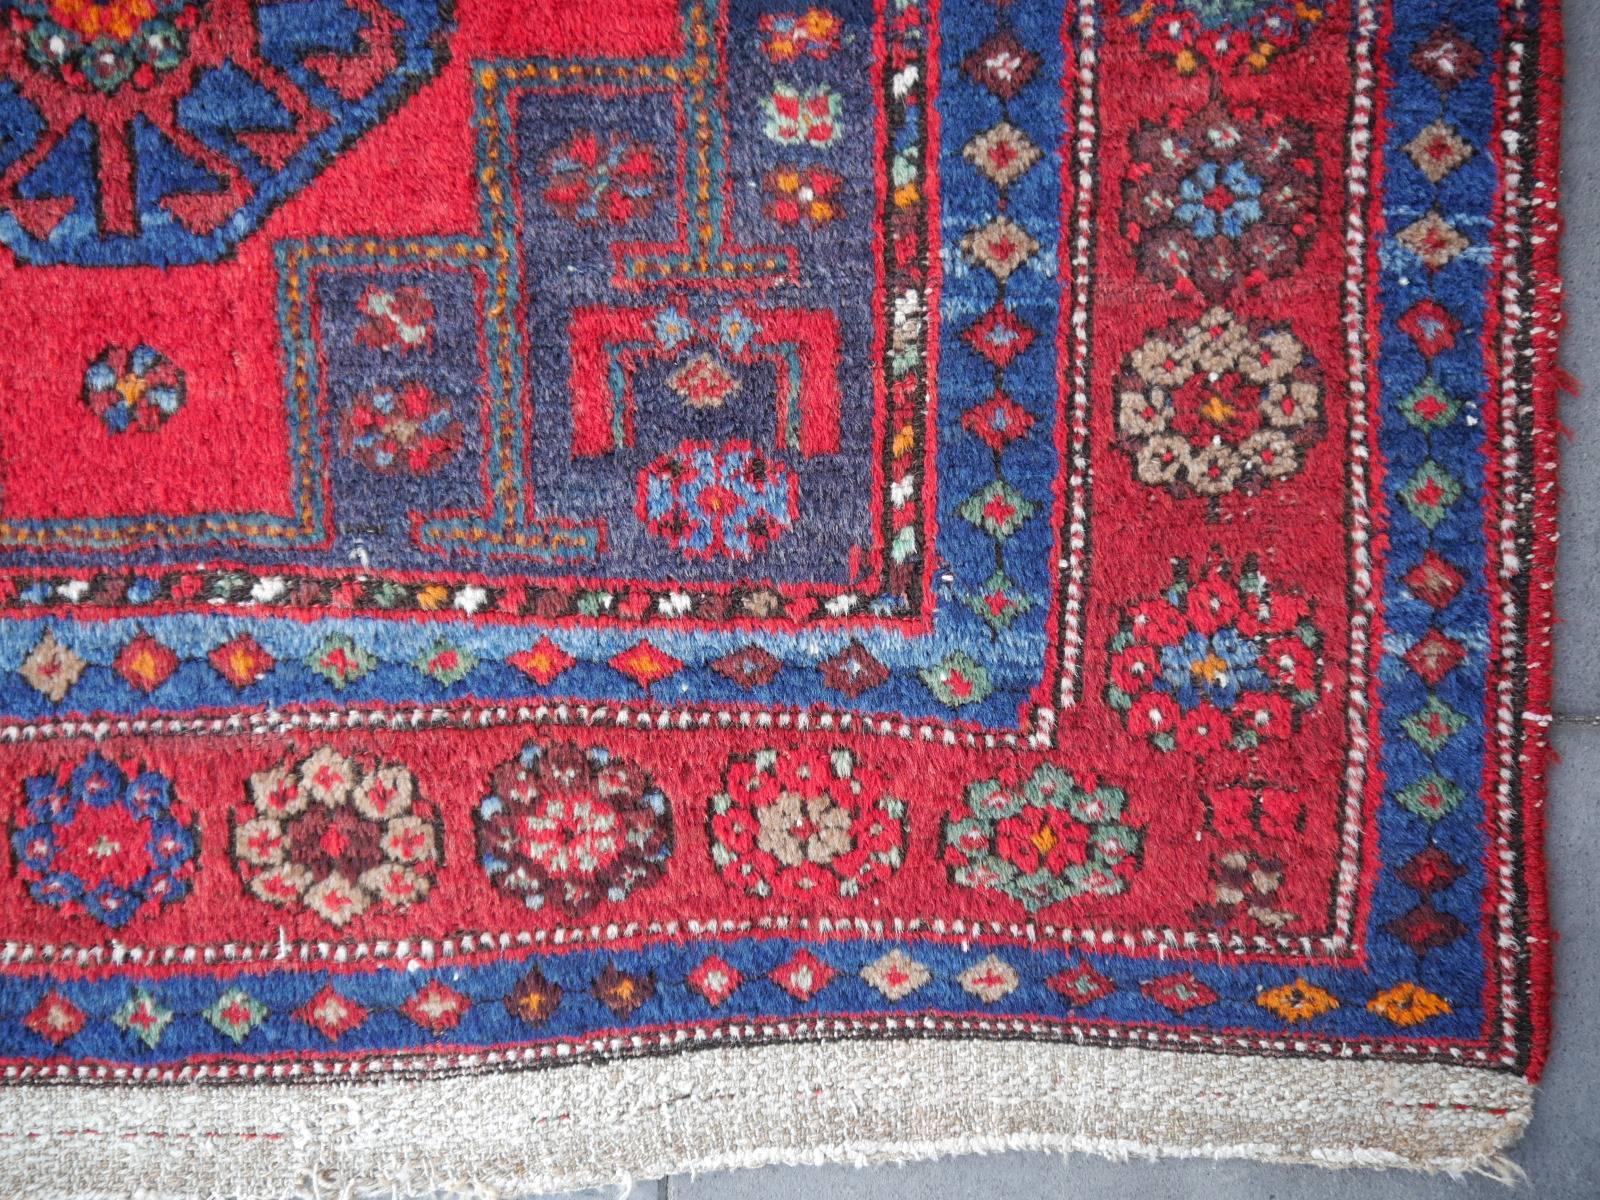 Hand-Knotted Shirvan Caucasian Vintage Carpet with Vibrant Colors Red Blue Orange Green